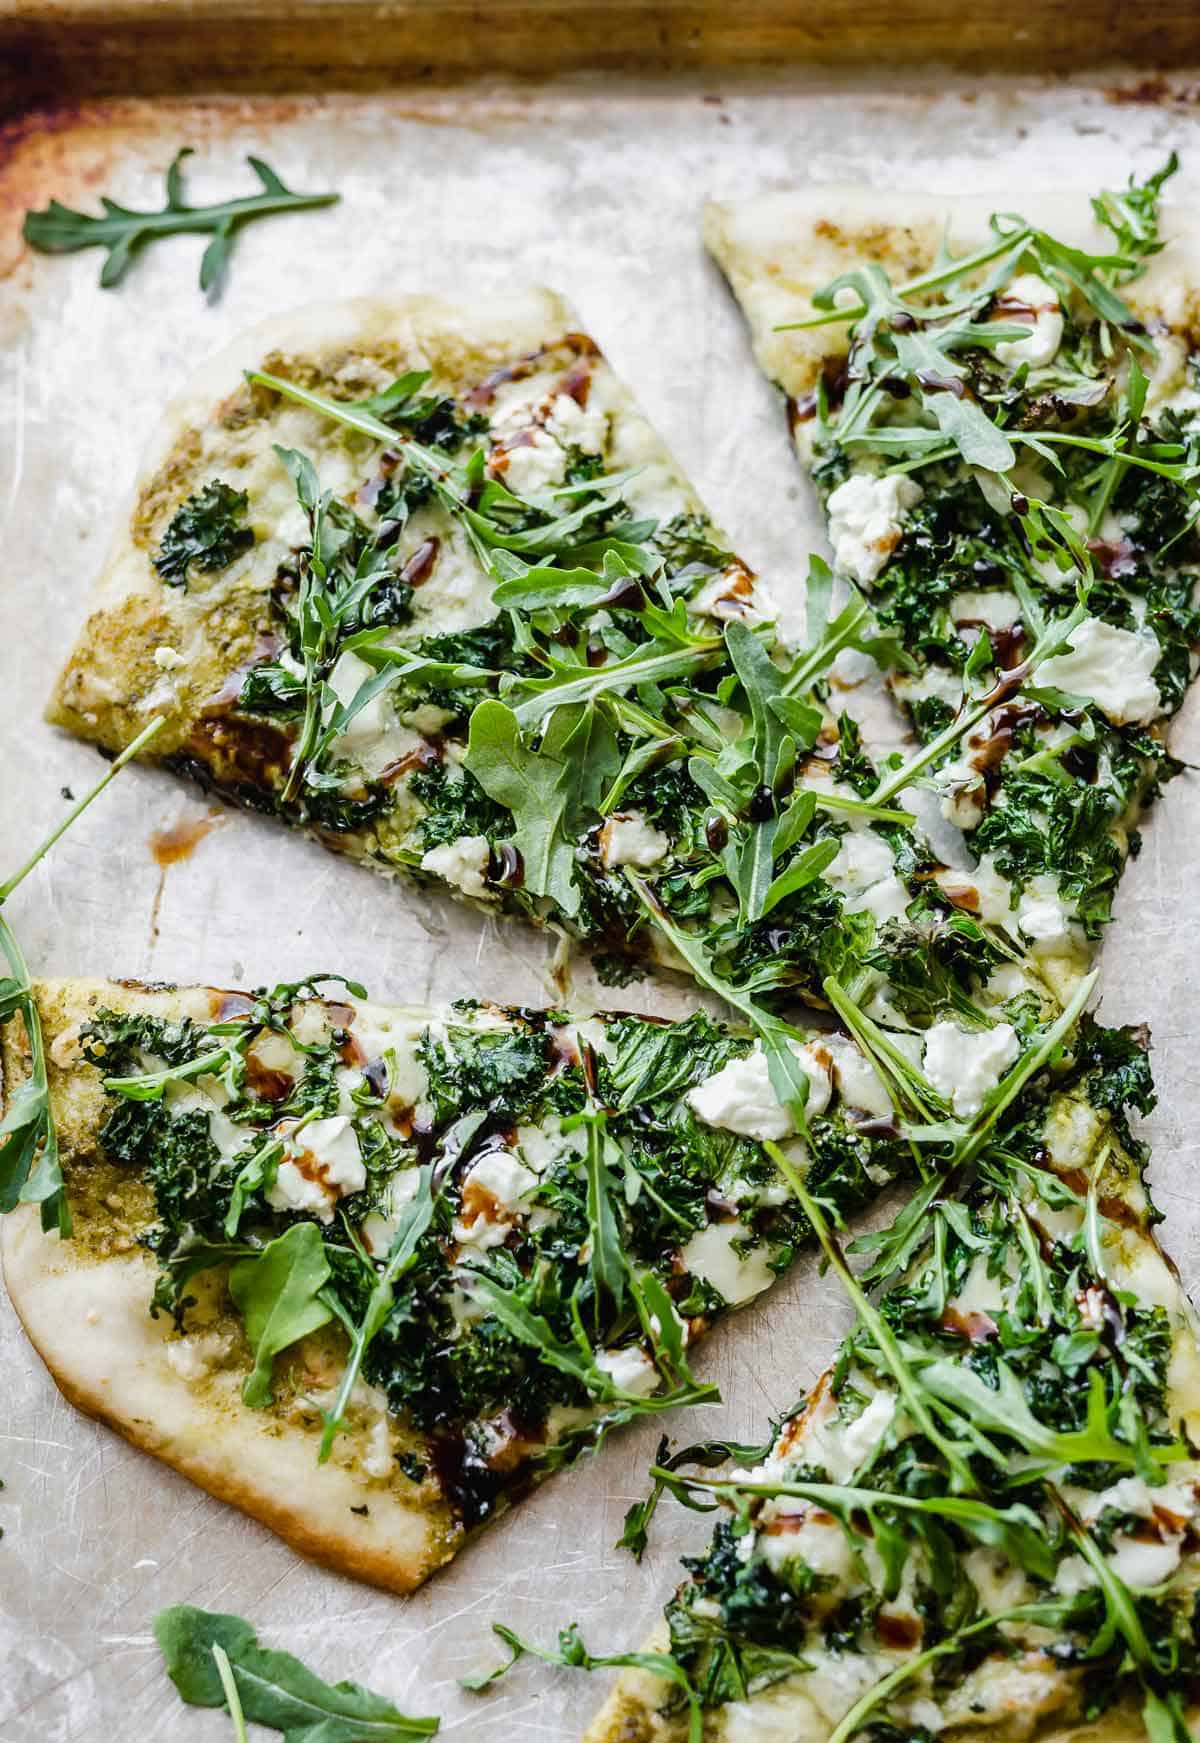 Kale pizza slices topped with arugula and goat cheese.